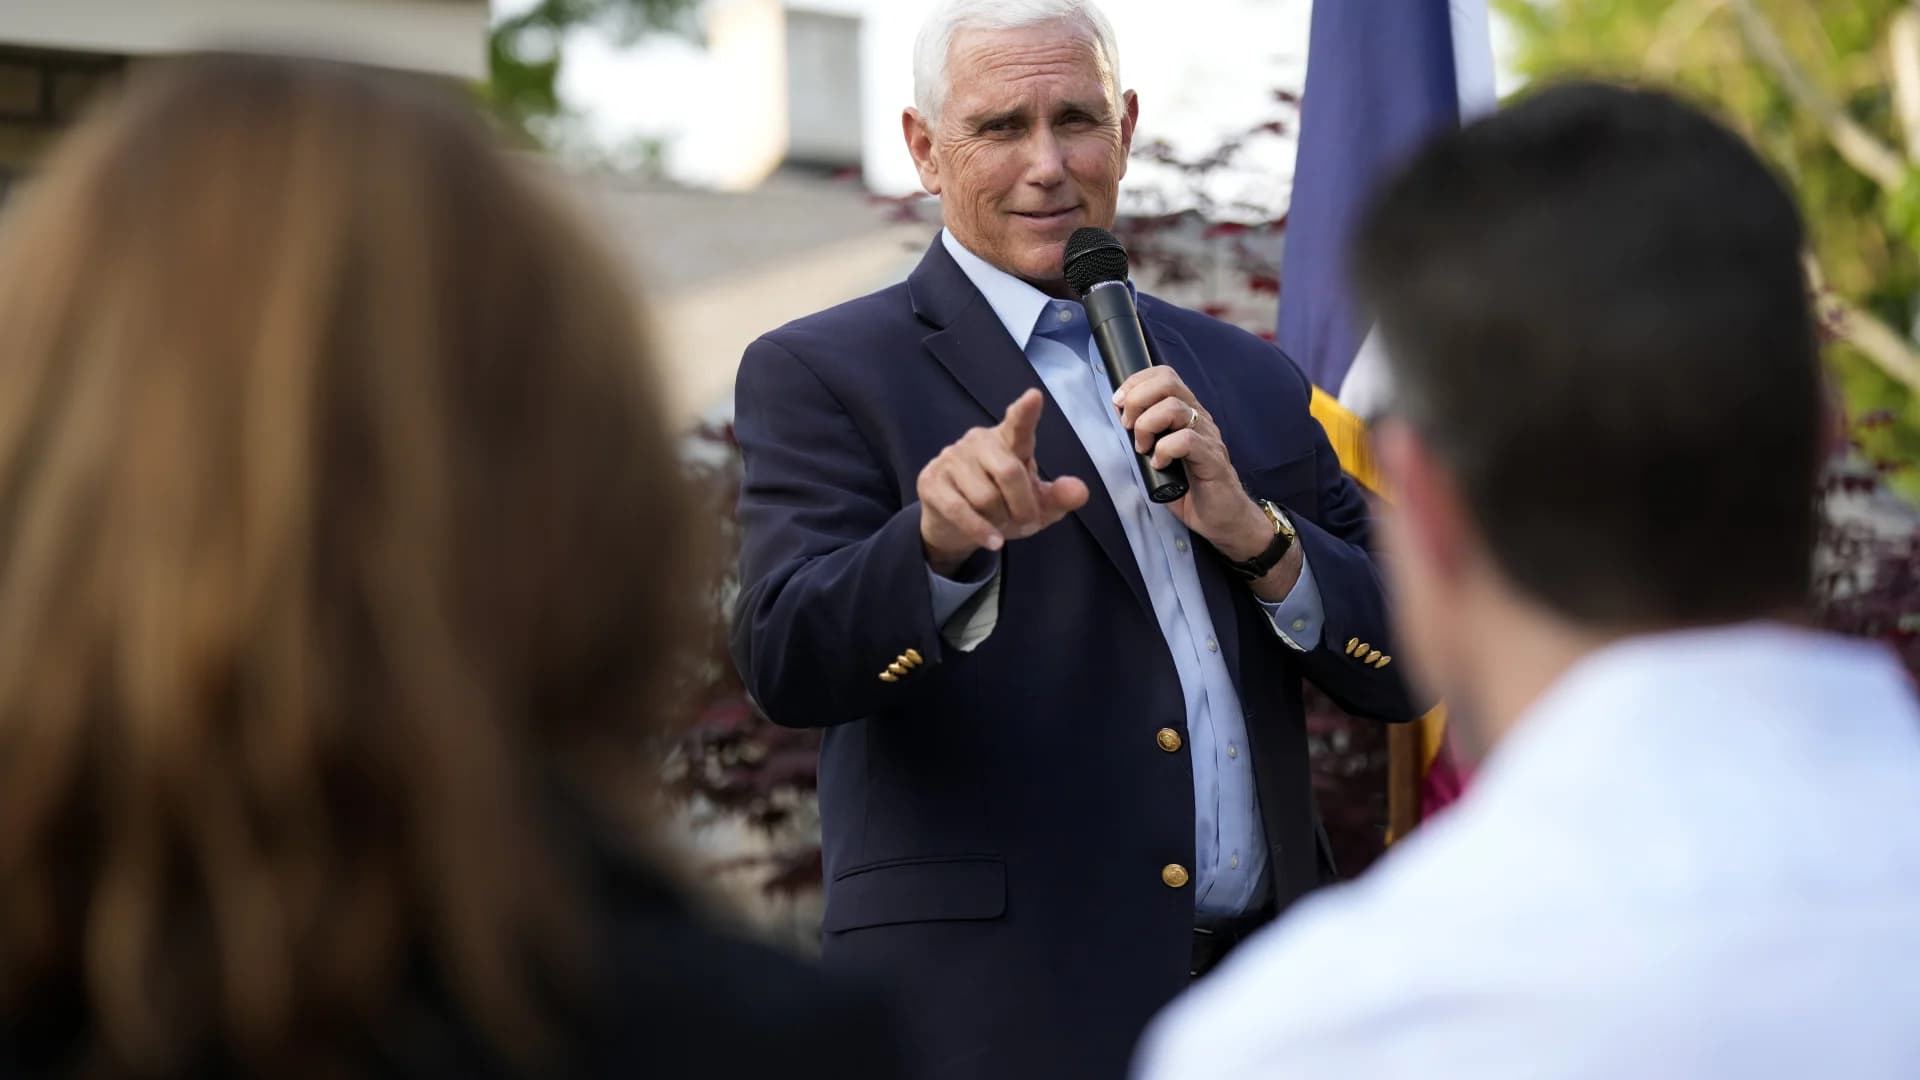 Mike Pence to launch campaign for president in Iowa June 7